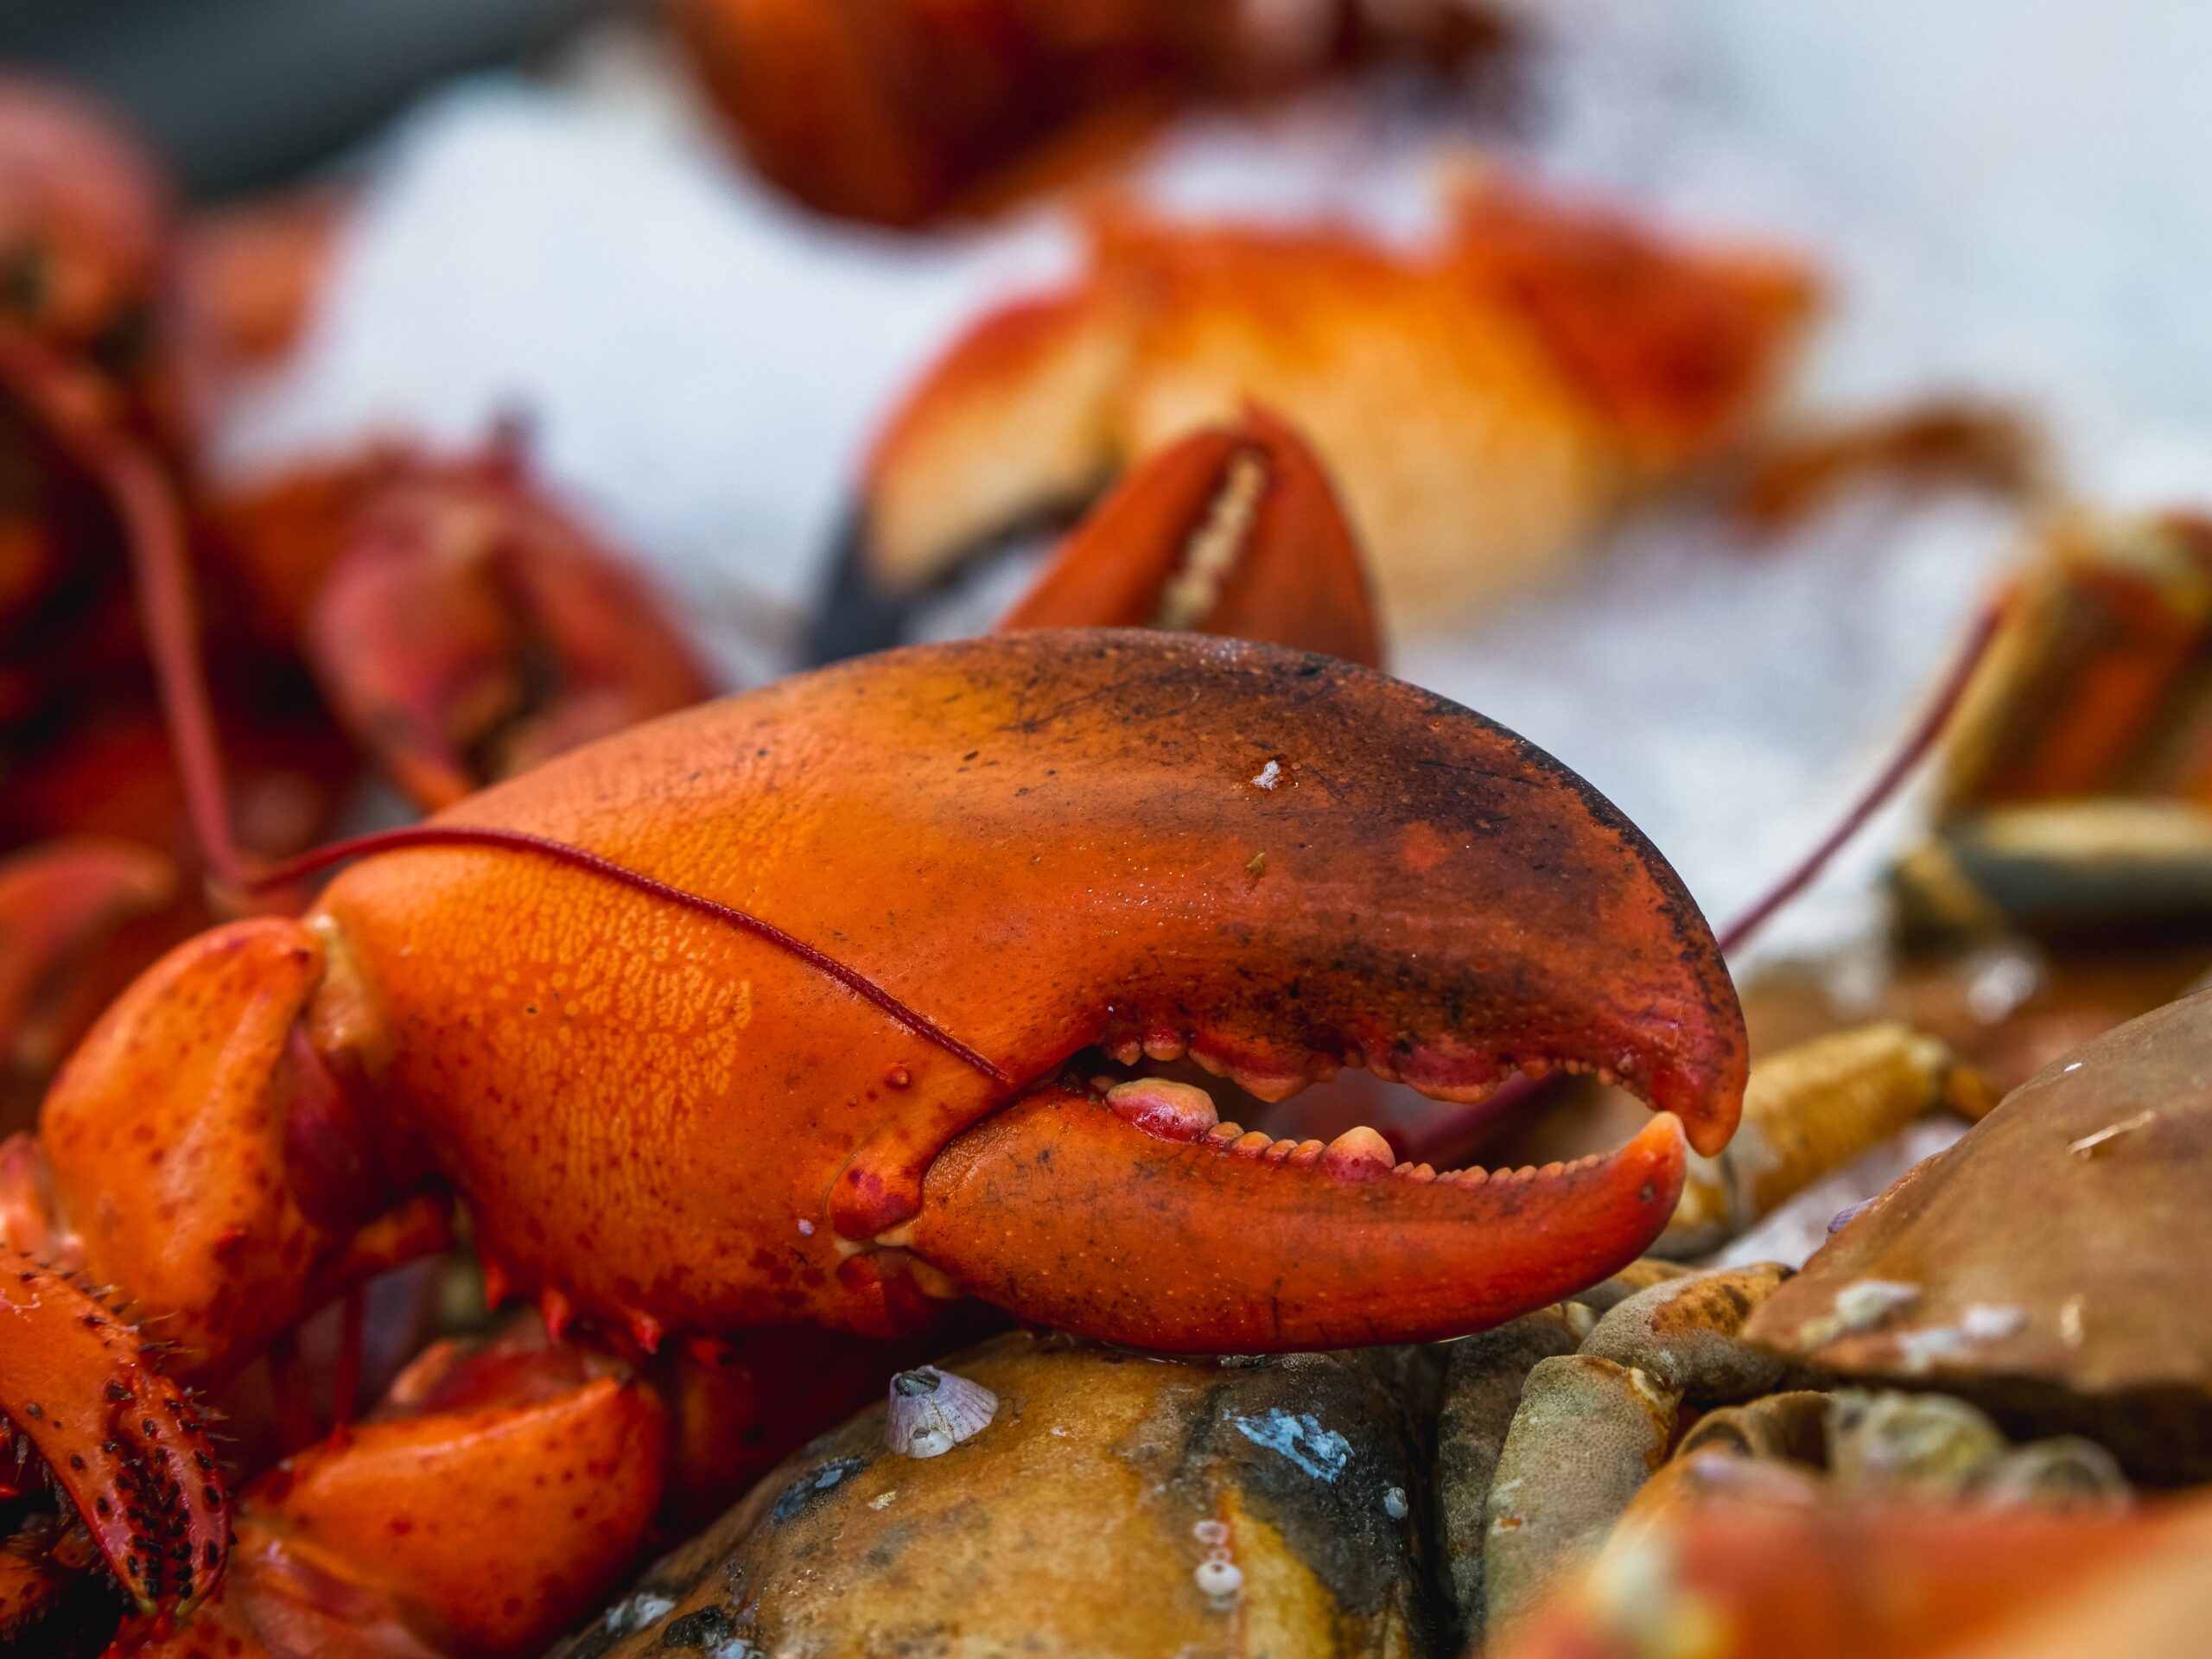 Eating sustainably may mean skipping the lobster for now